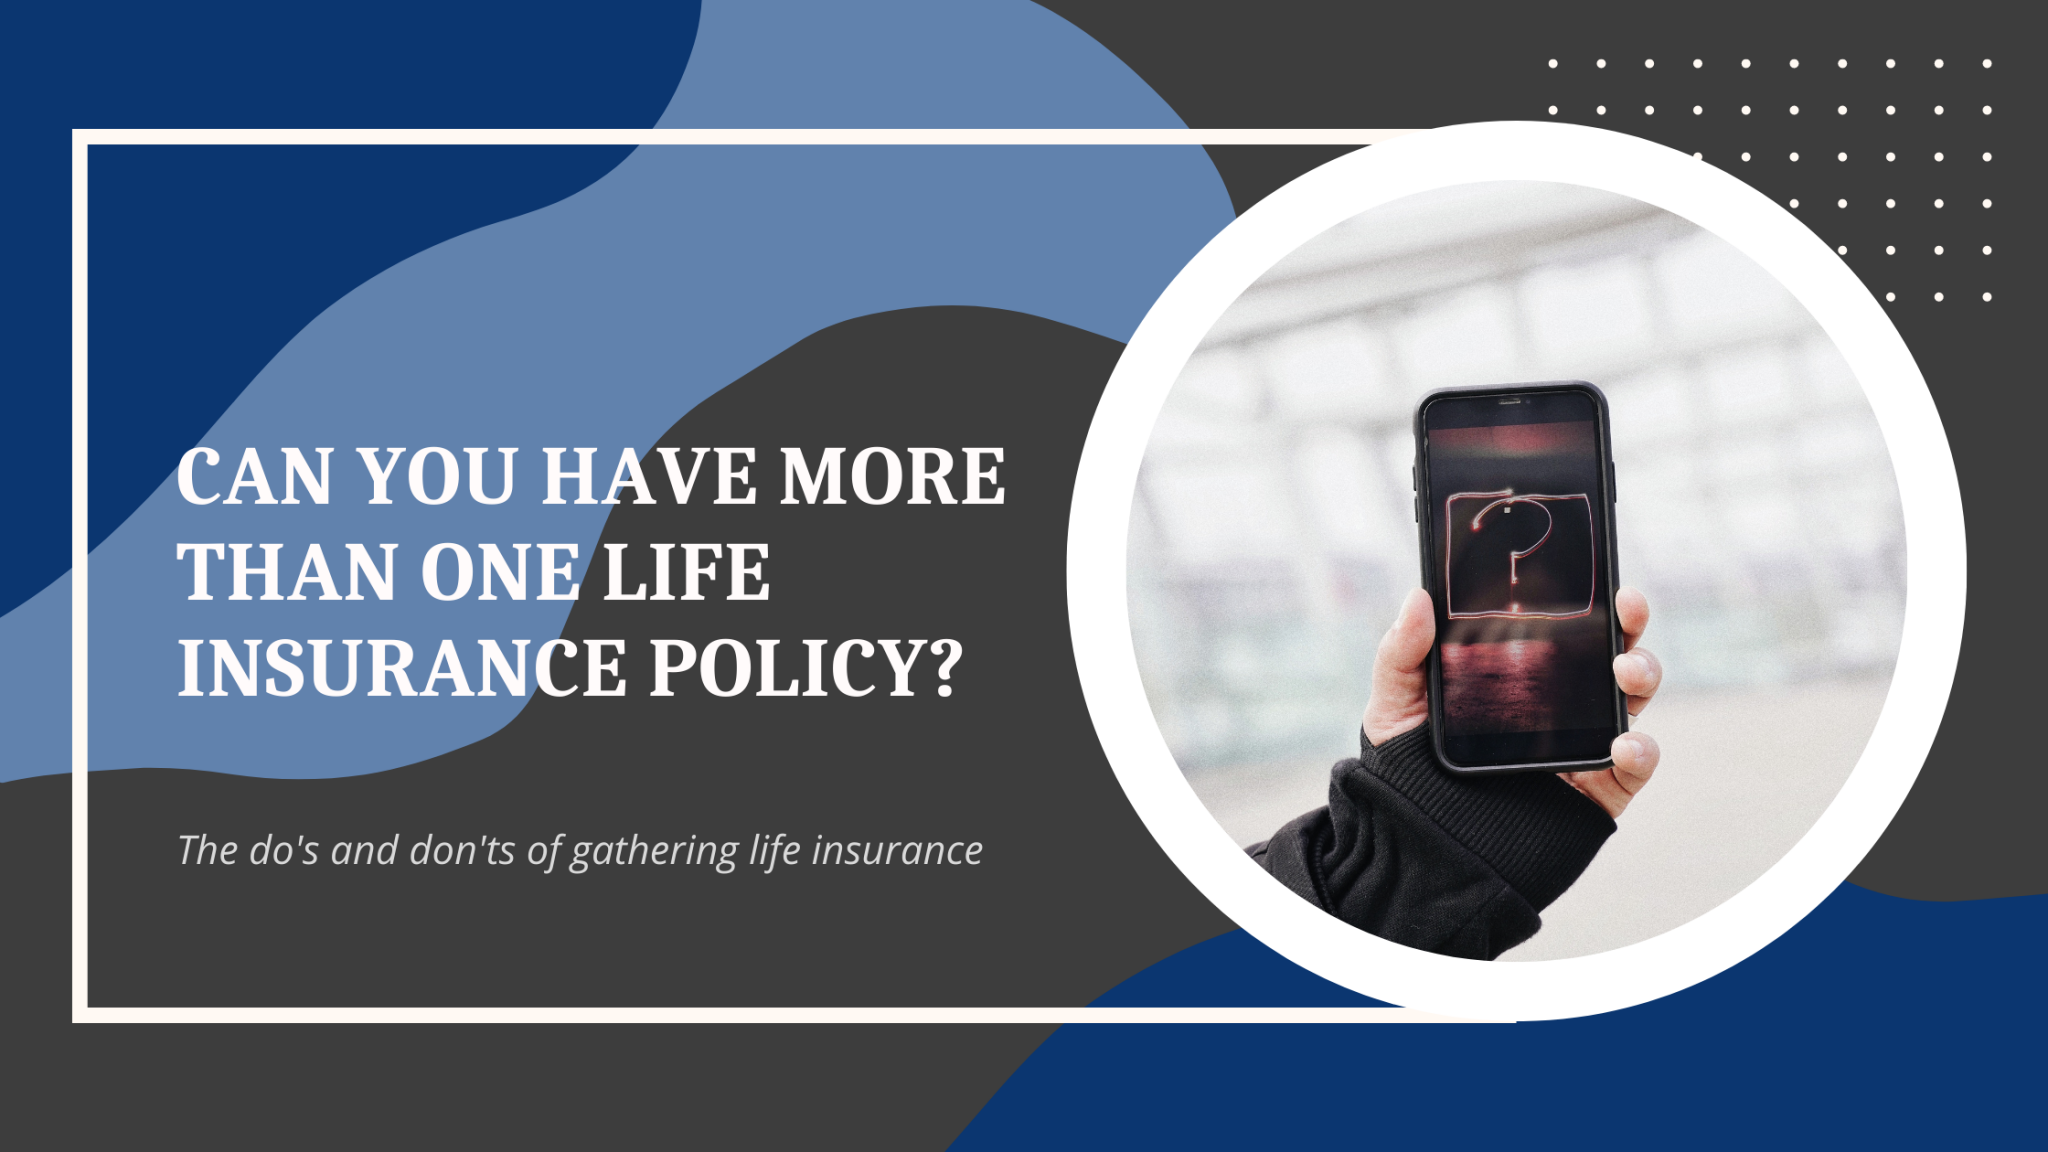 Can You Have More Than One Life Insurance Policy?